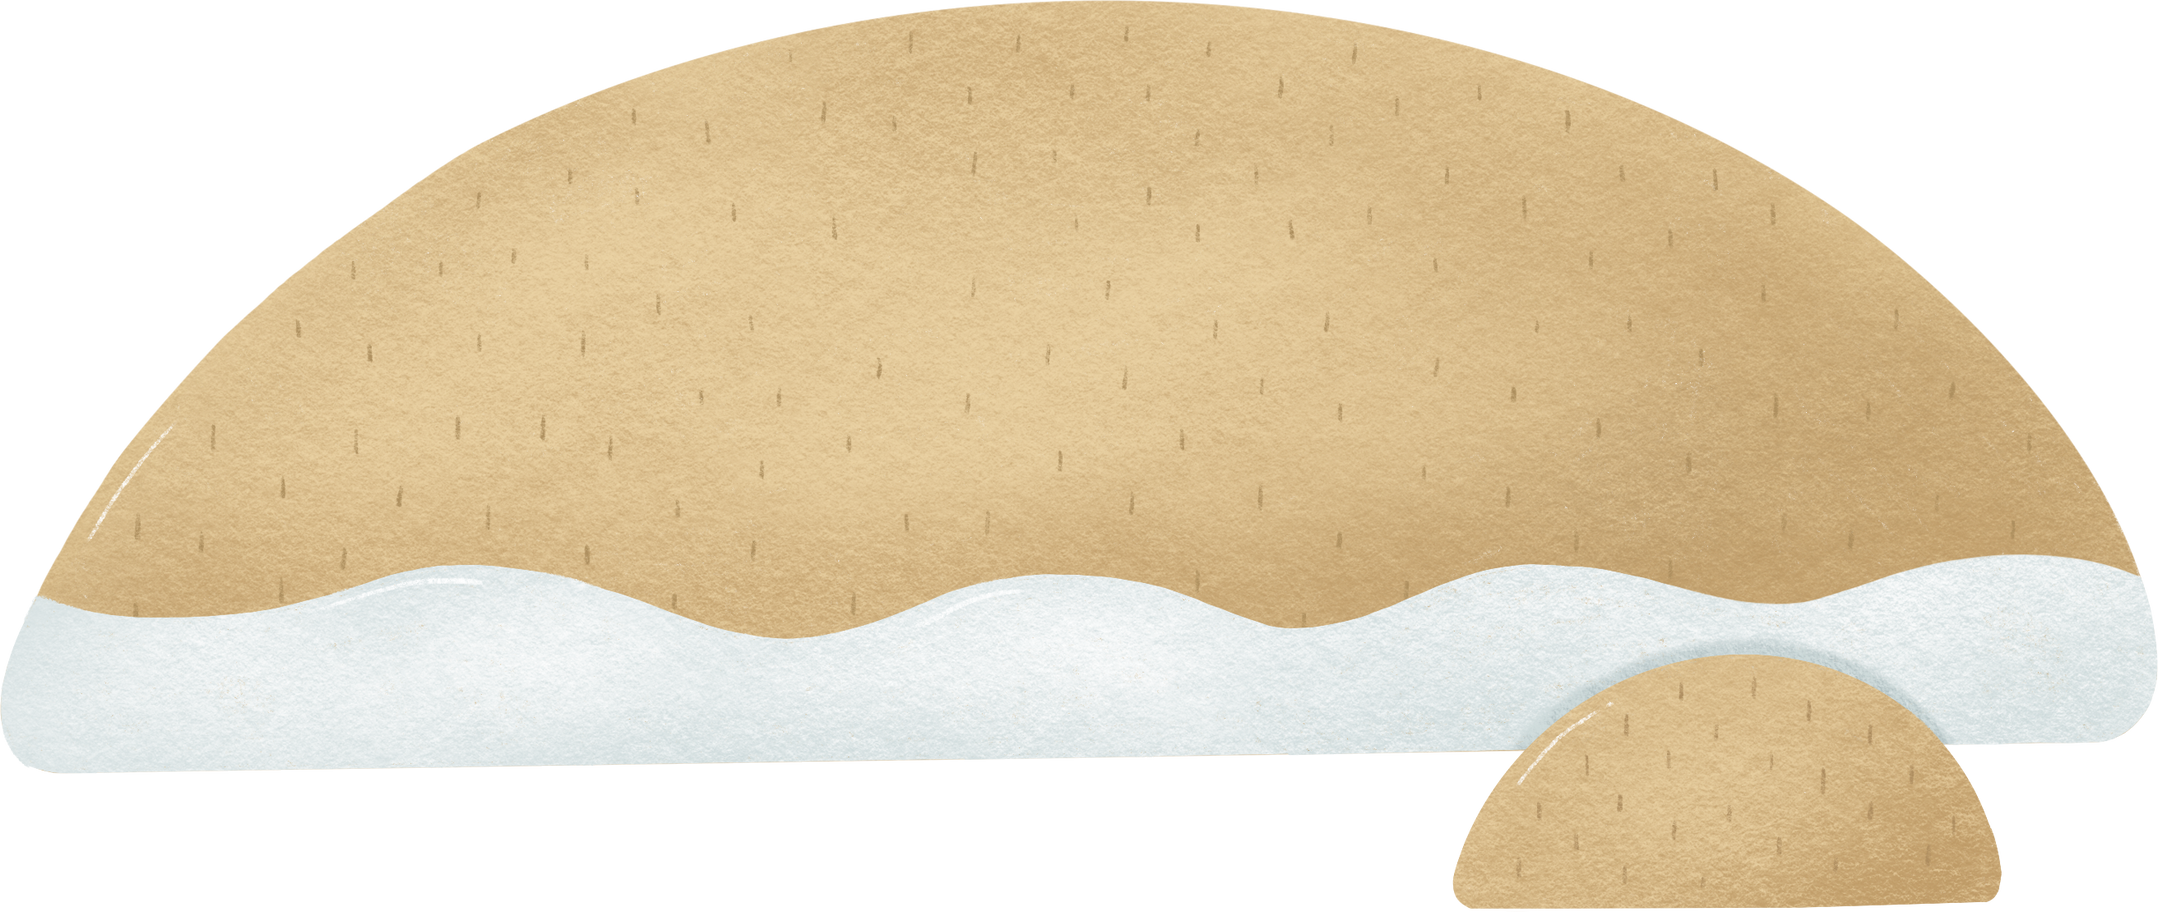 land with snow Illustration in PNG, SVG